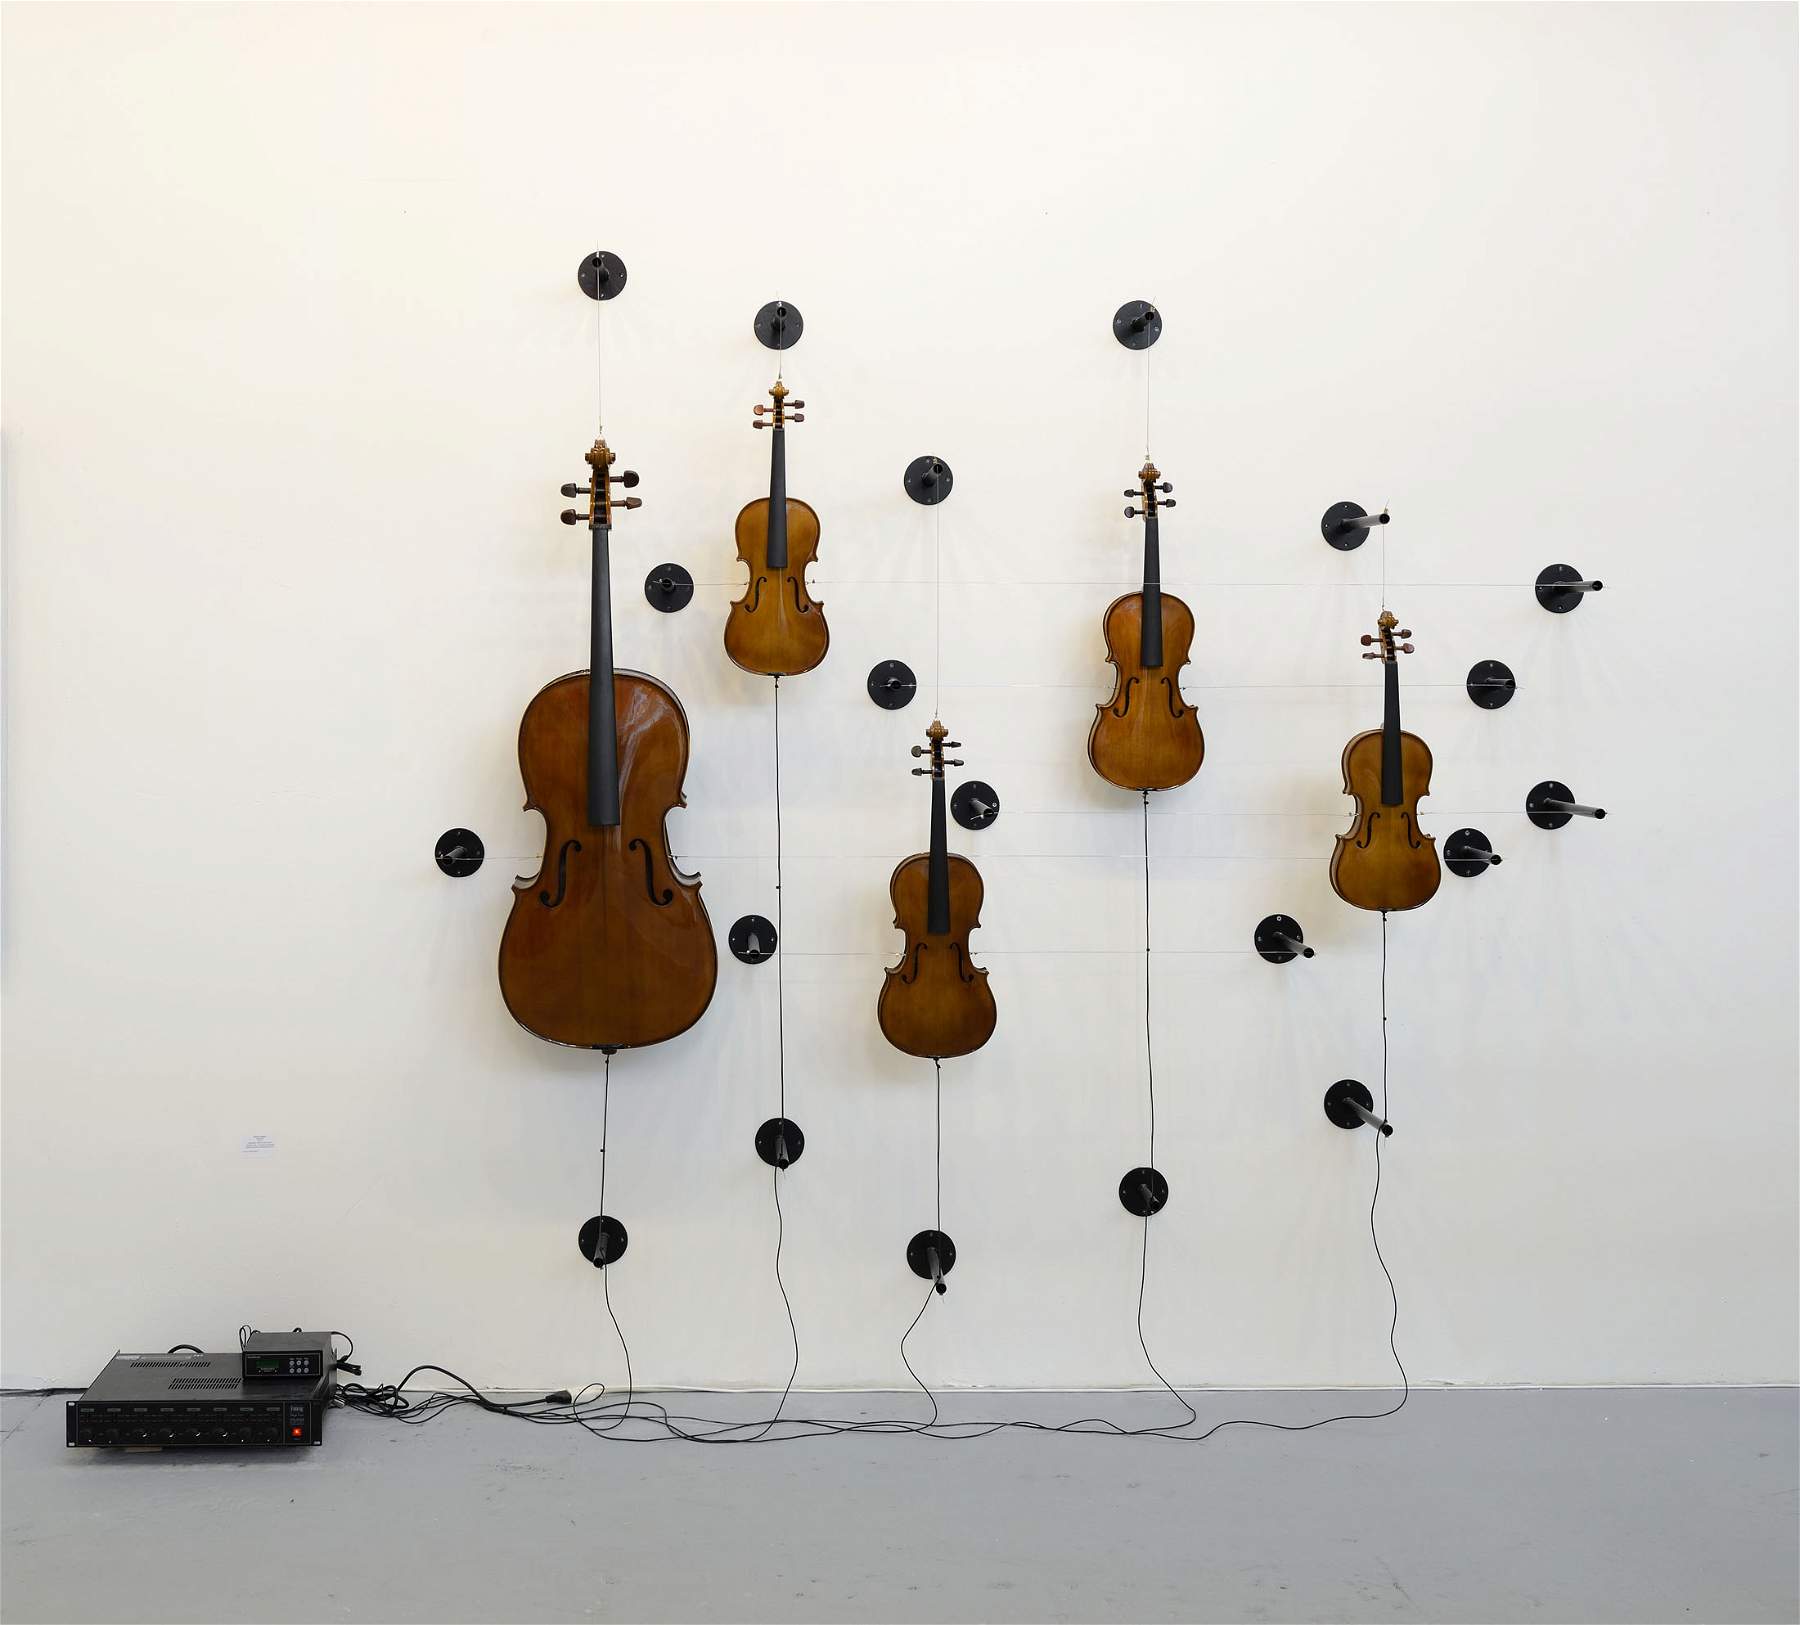 Can an architecture play music? Here is Roberto Pugliese's Concert for Architecture, on display in Milan.